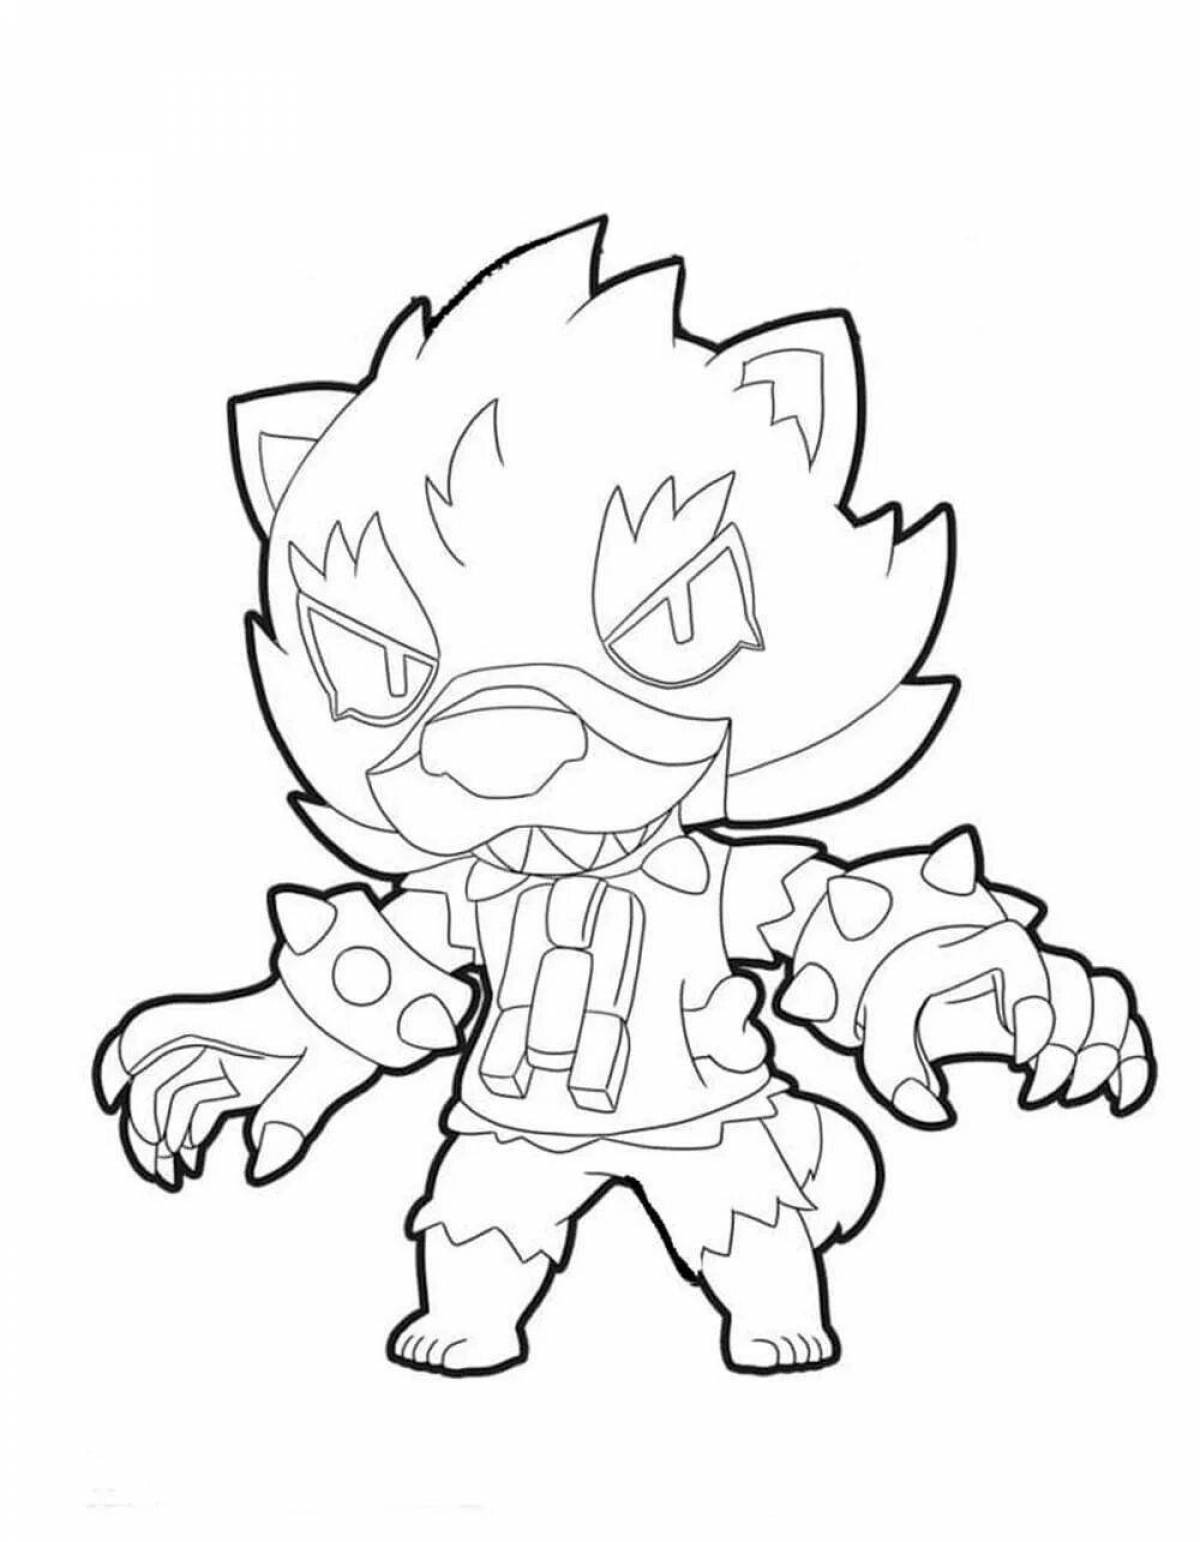 Coloring page charming leon bs